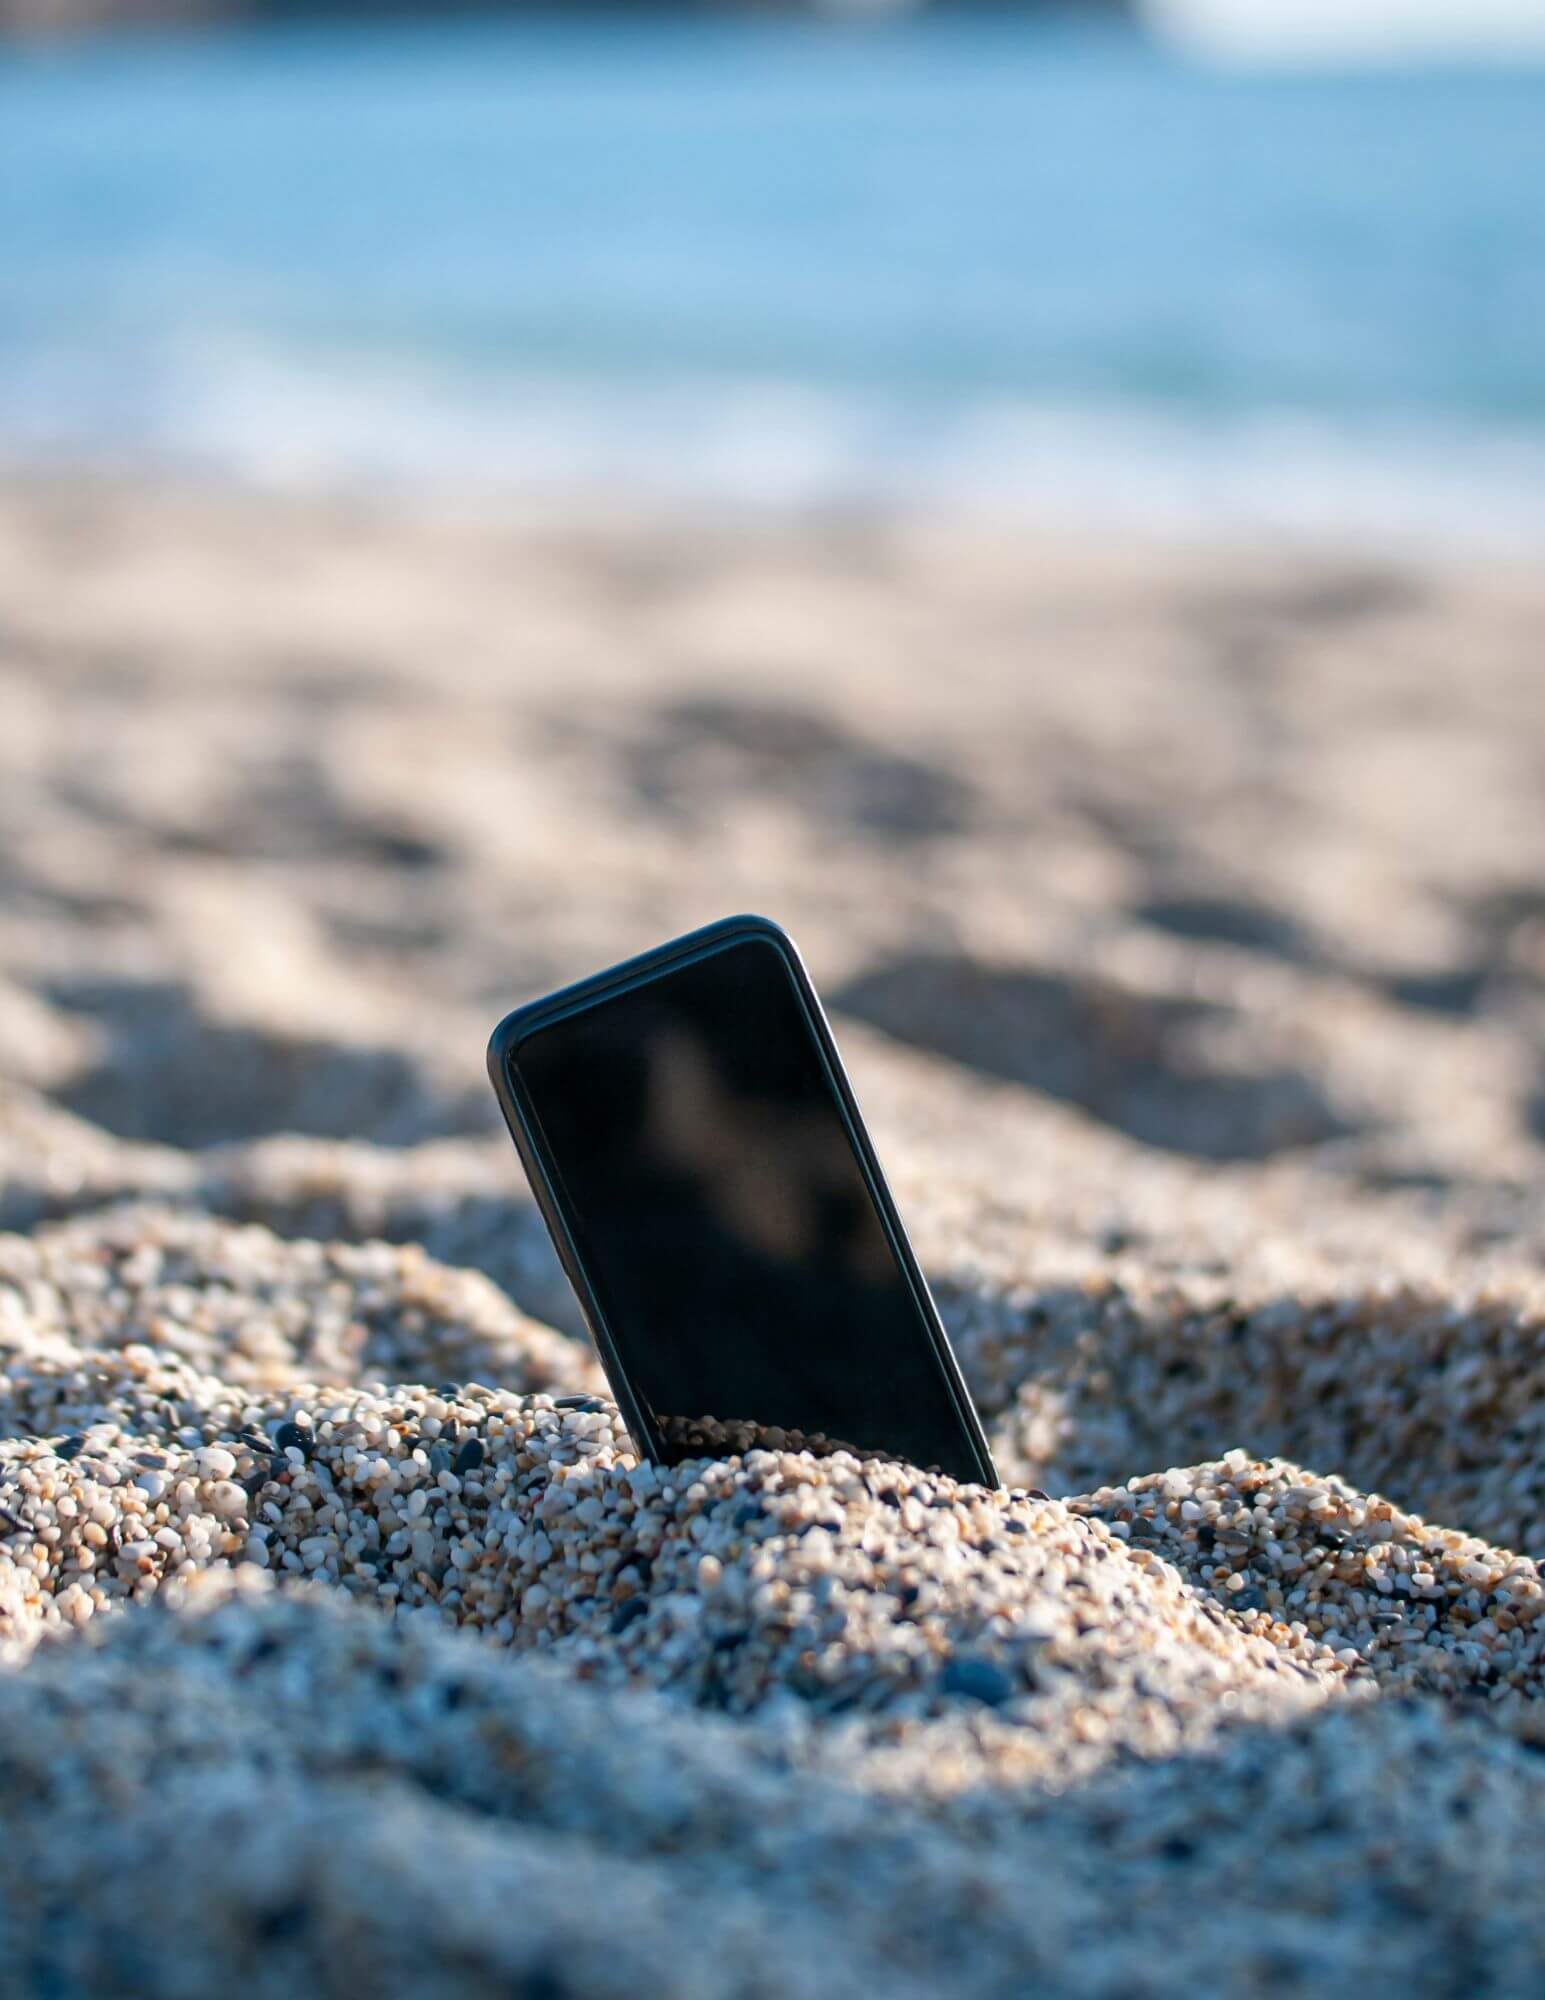 A smart phone sticking out of the sand at the beach